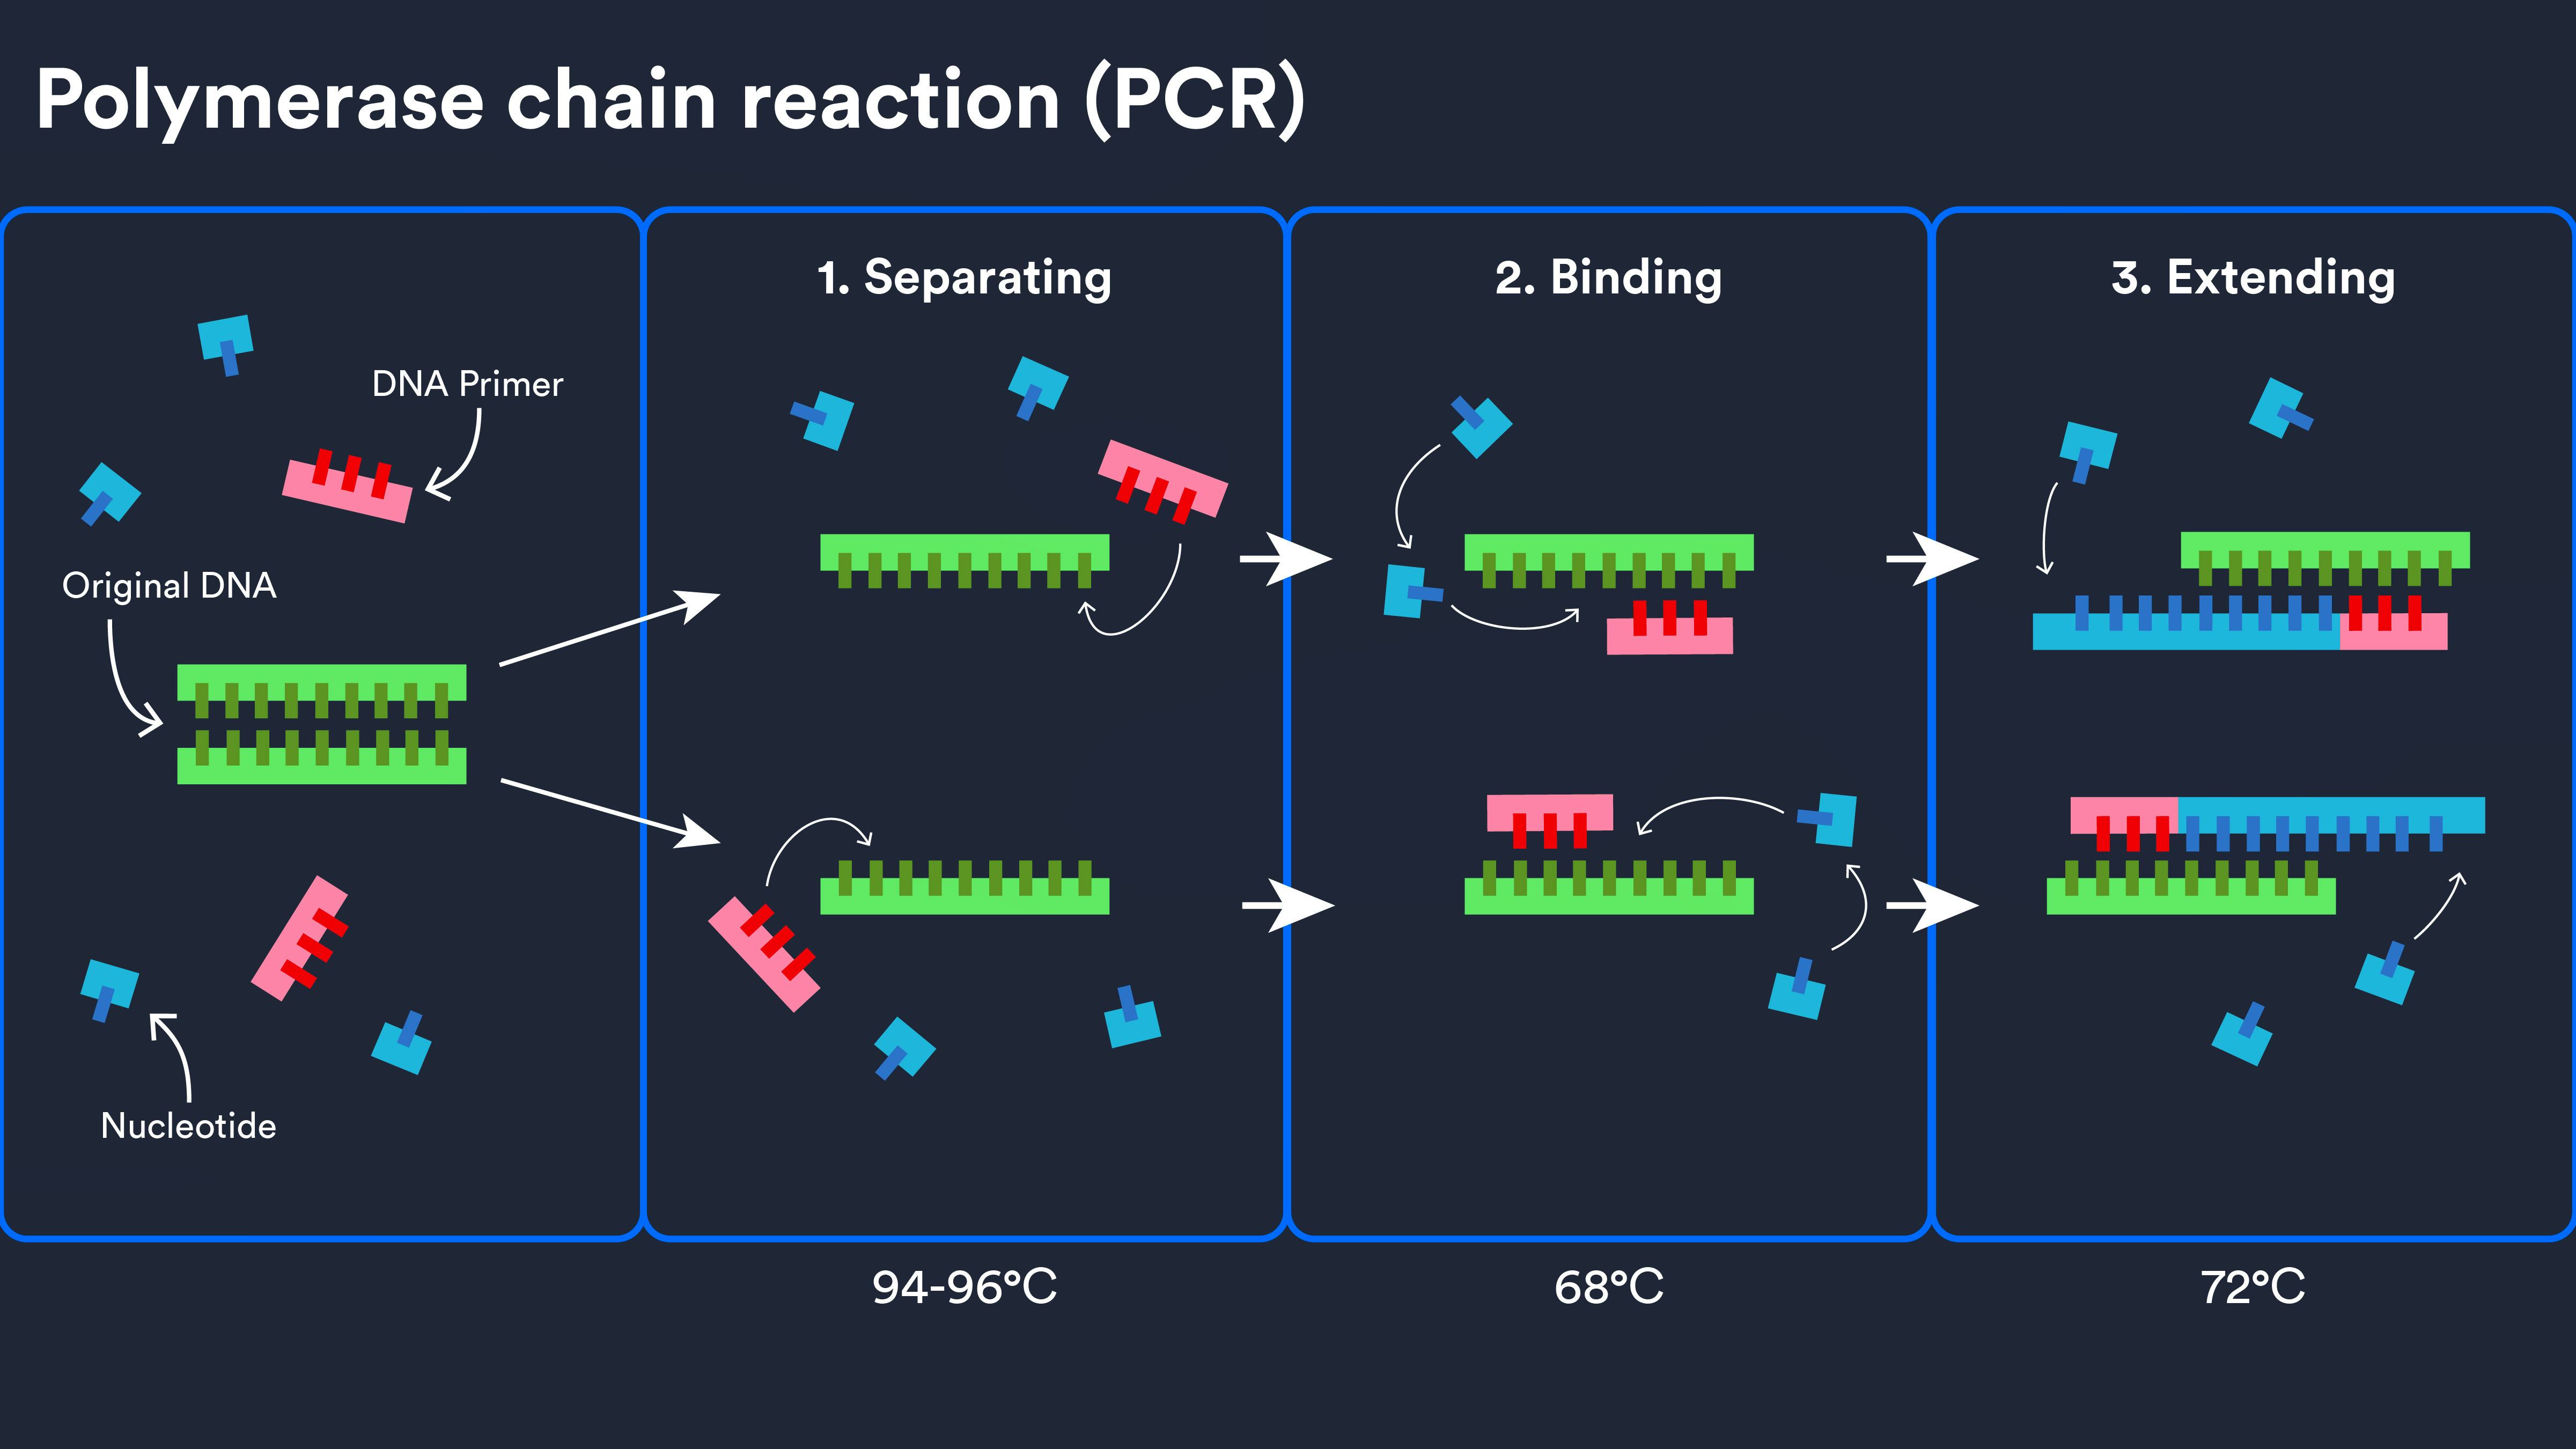 Newsela - How polymerase chain reaction (PCR) works